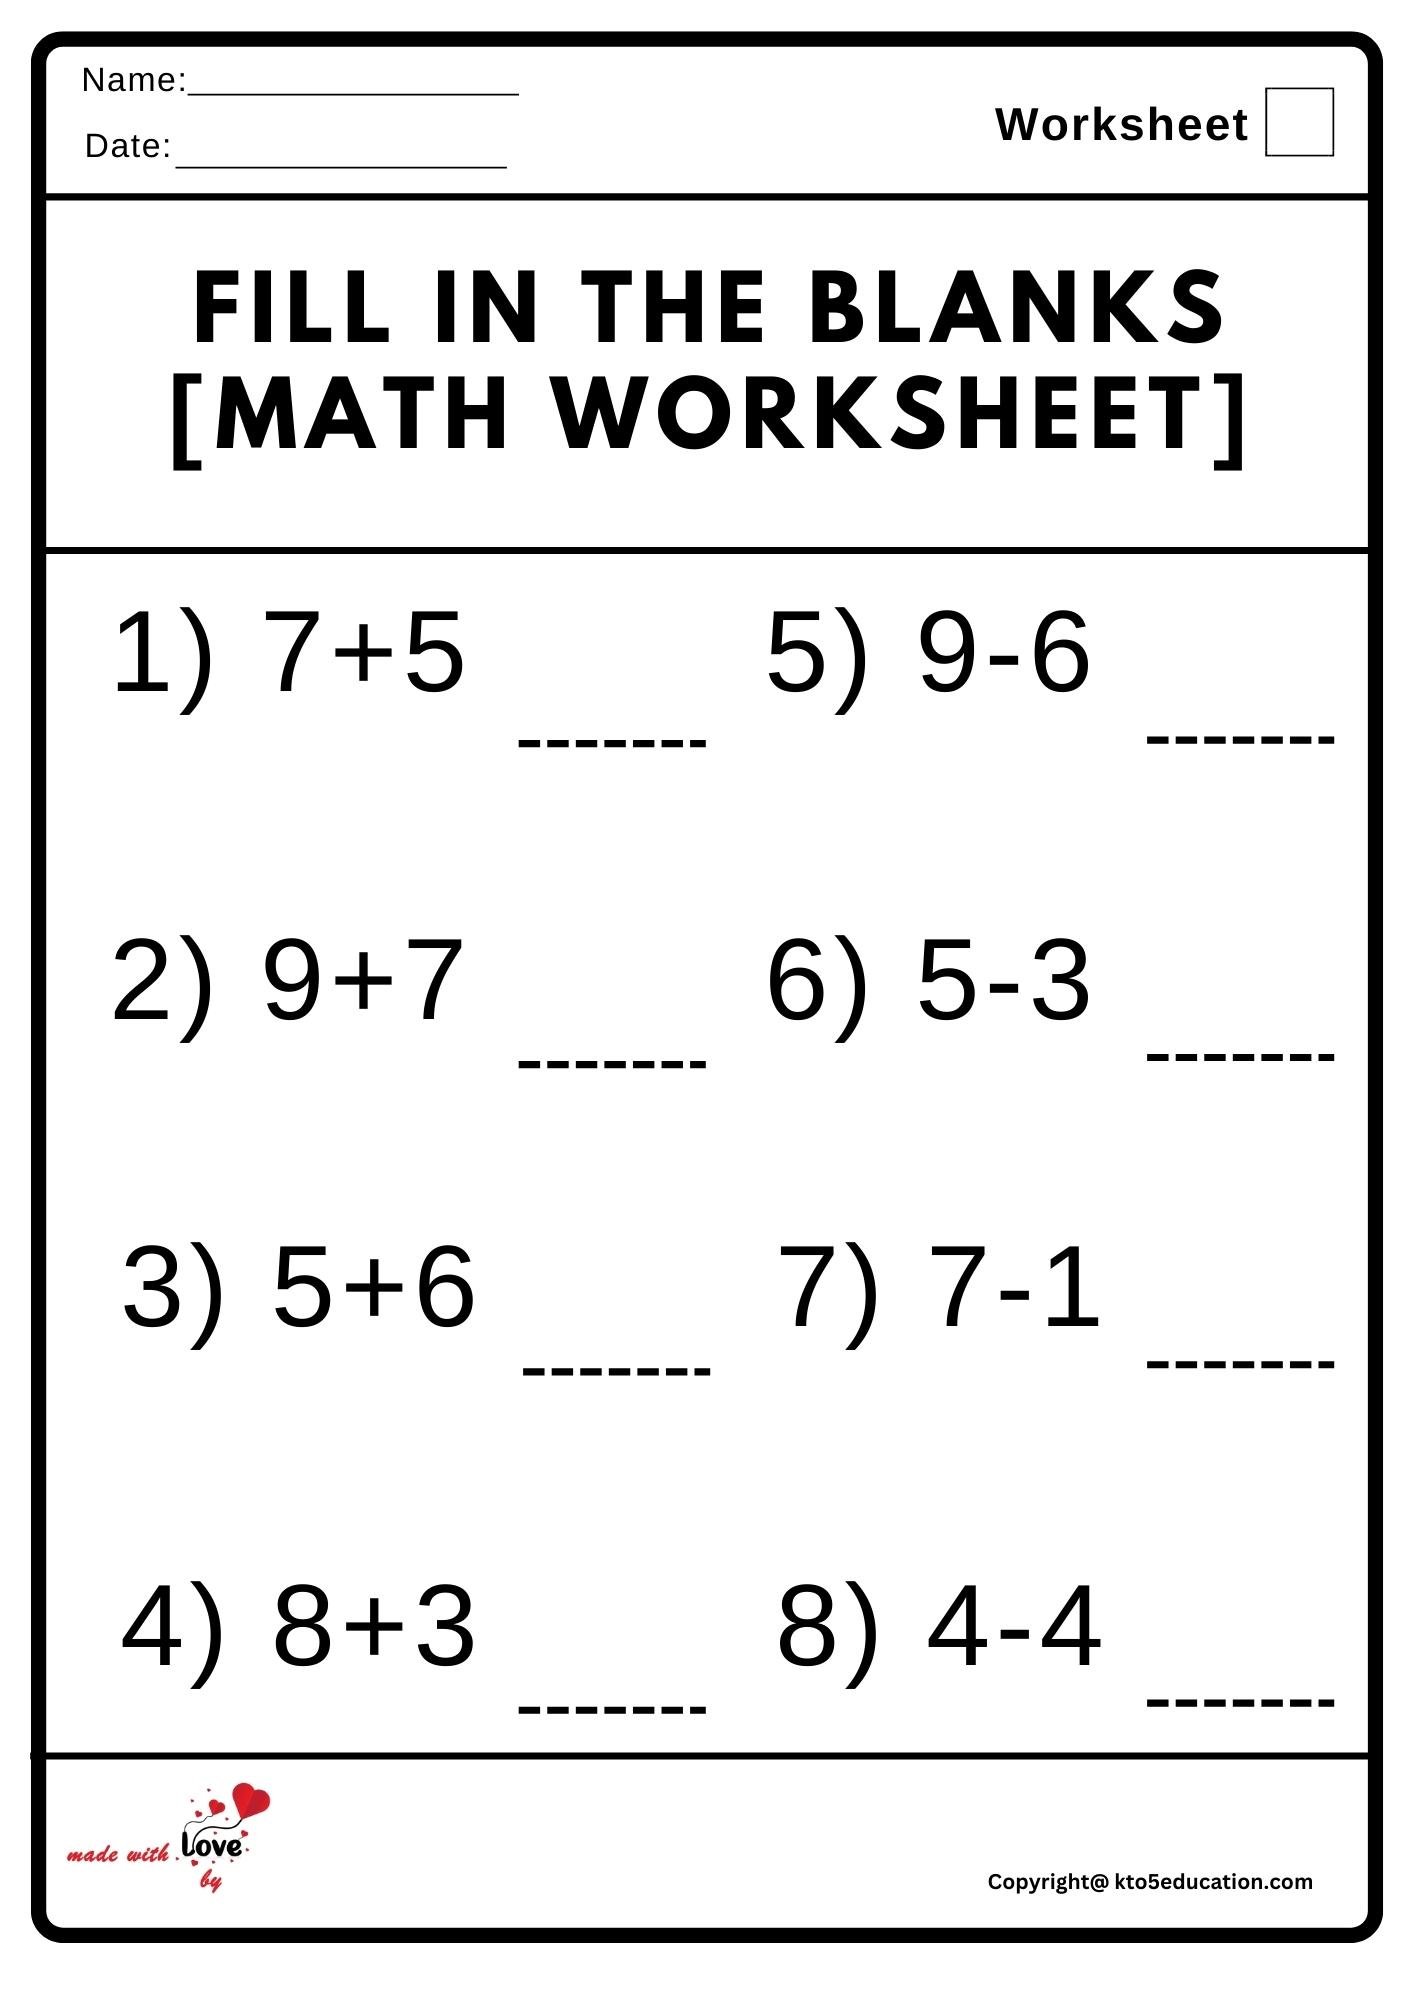 Fill In The Blanks Math Worksheet